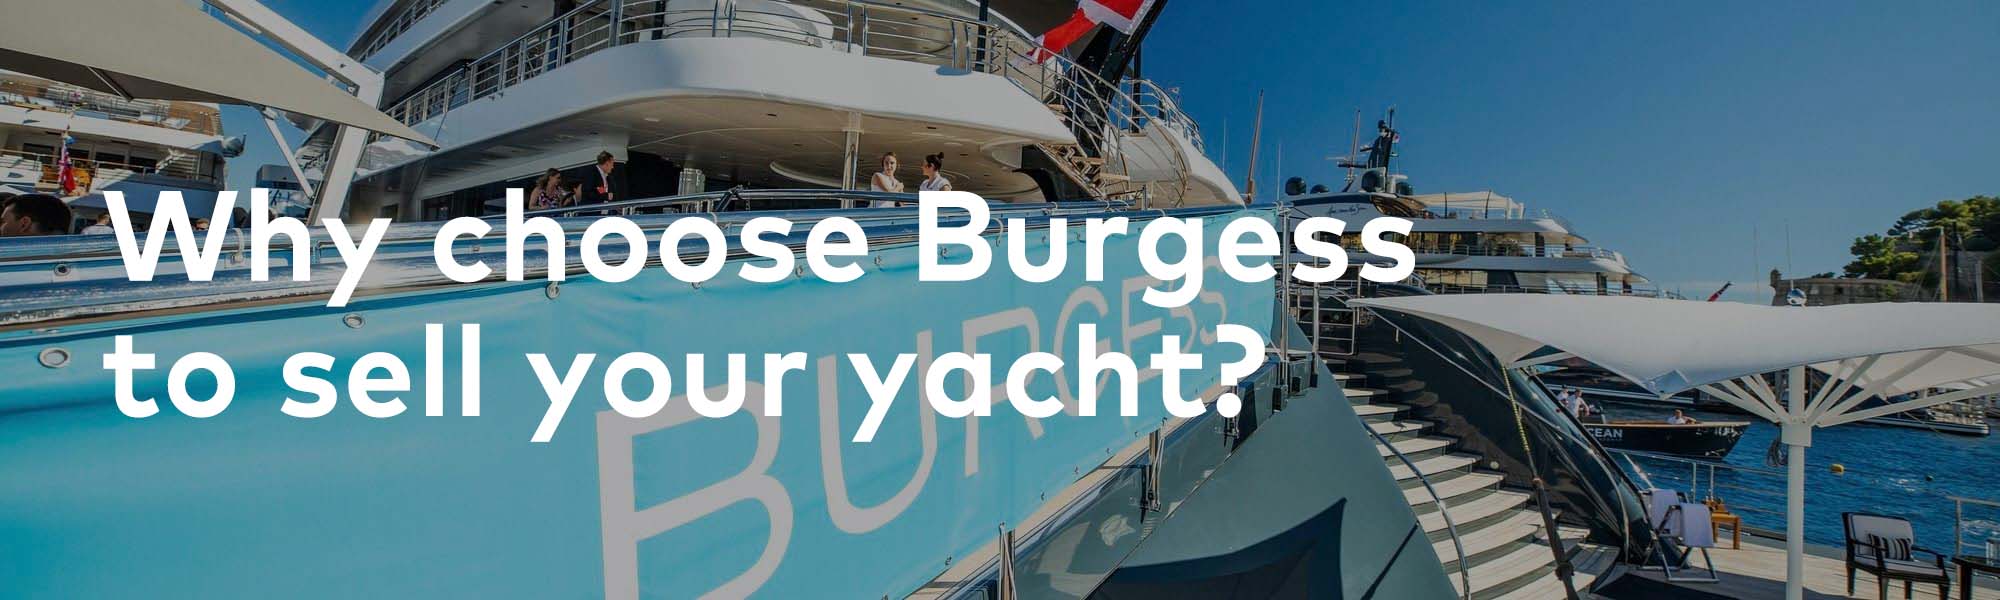 Why choose Burgess to sell your yacht?